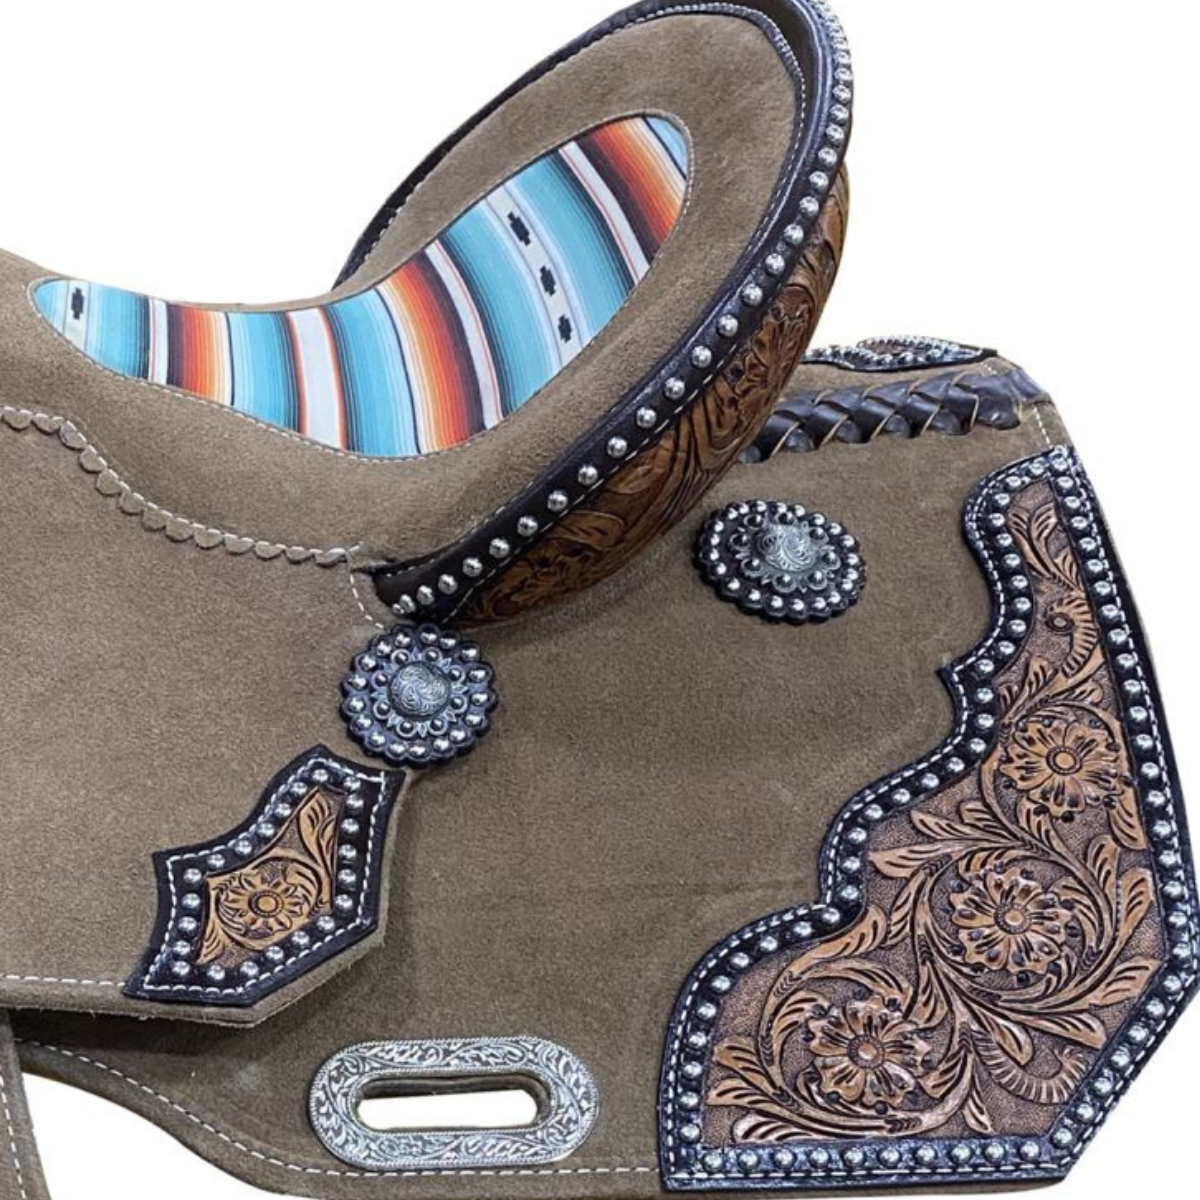 14", 15" DOUBLE T   ROUGH OUT BARREL STYLE SADDLE WITH SOUTHWEST SERAPE PRINTED INLAY - Double T Saddles